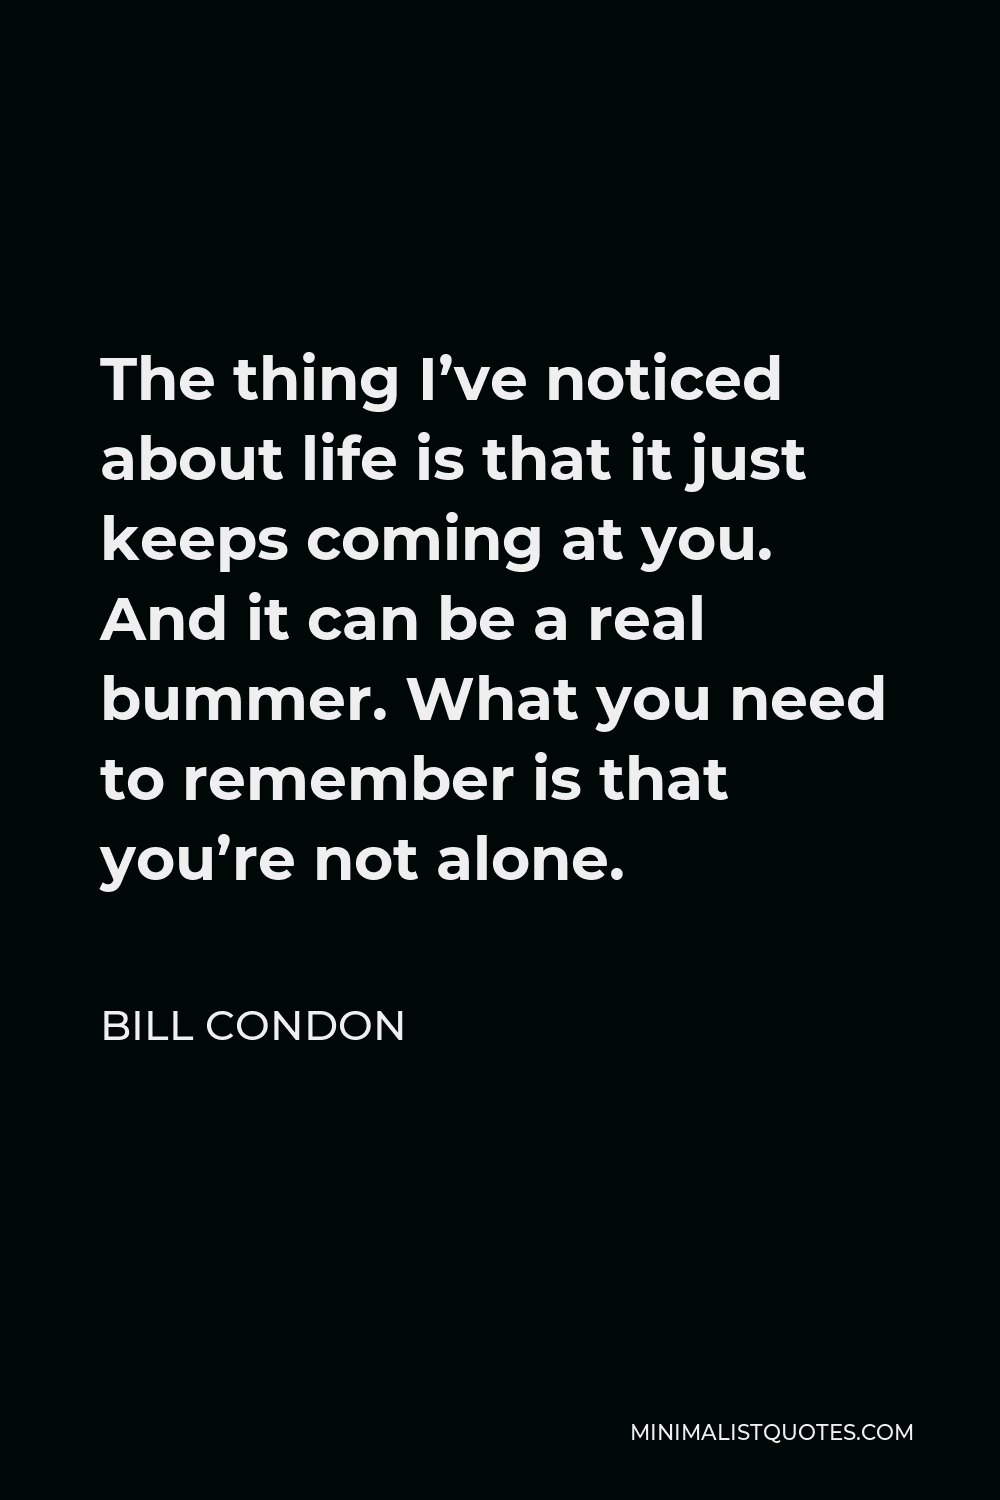 Bill Condon Quote - The thing I’ve noticed about life is that it just keeps coming at you. And it can be a real bummer. What you need to remember is that you’re not alone.